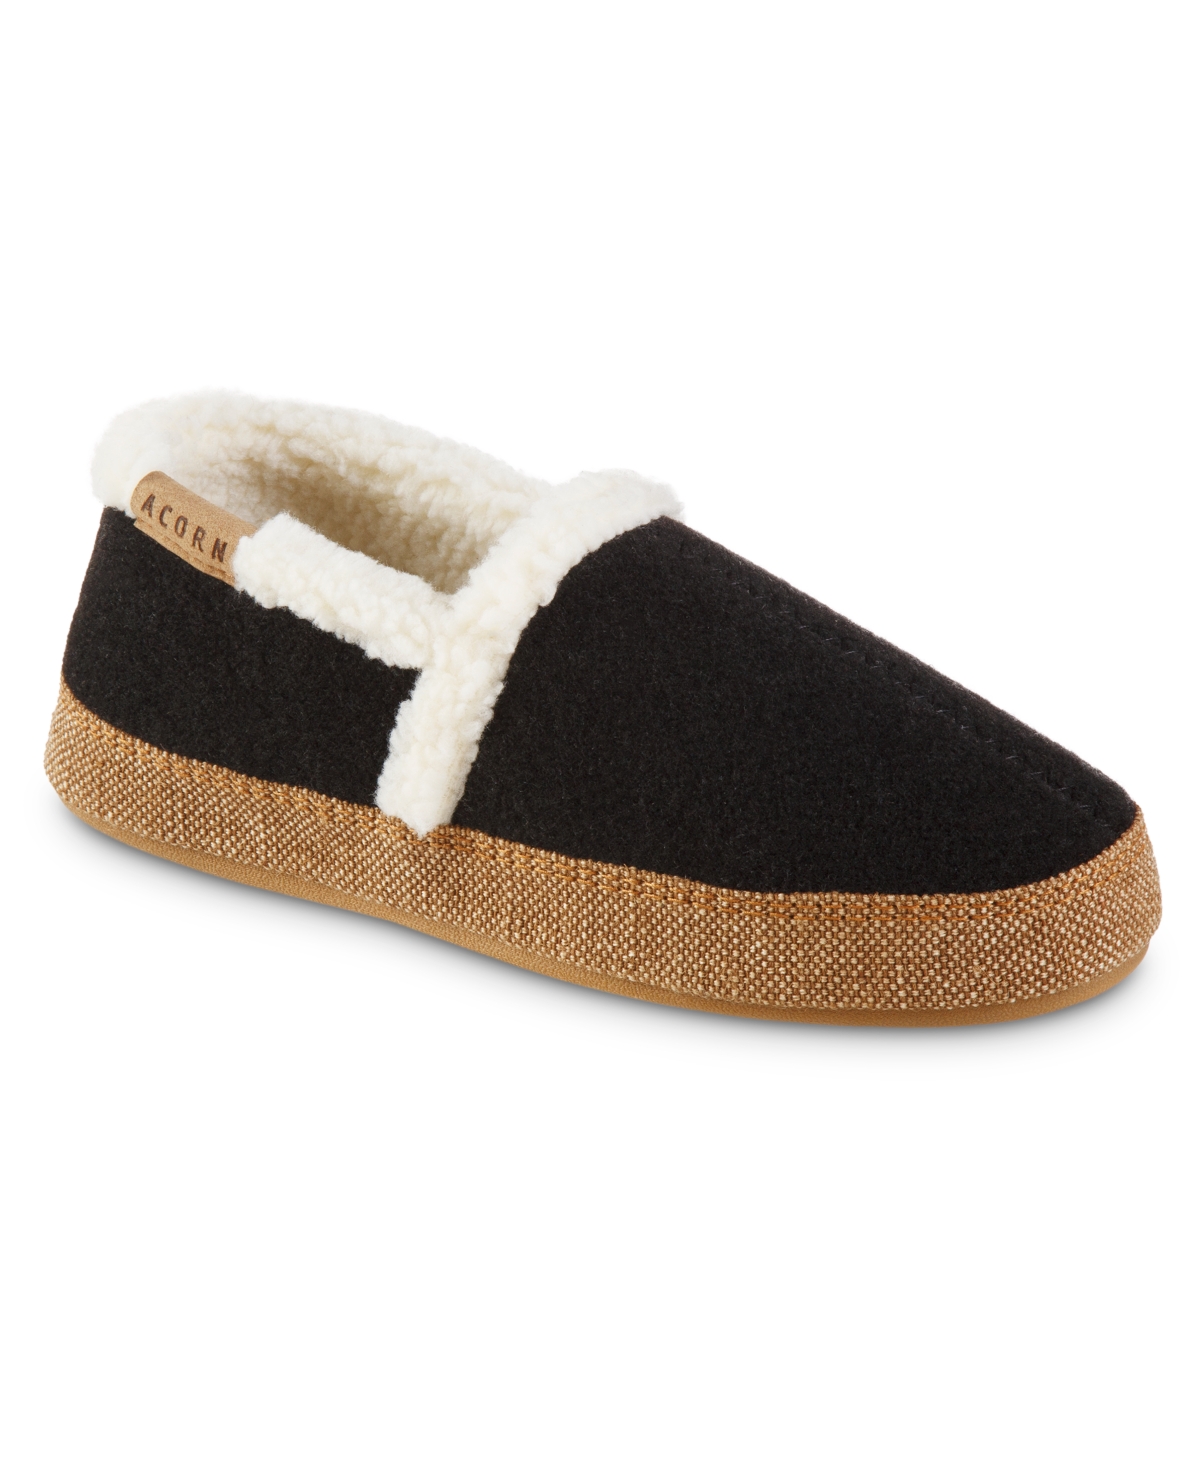 Acorn Women's Madison Moccasin Slippers Women's Shoes